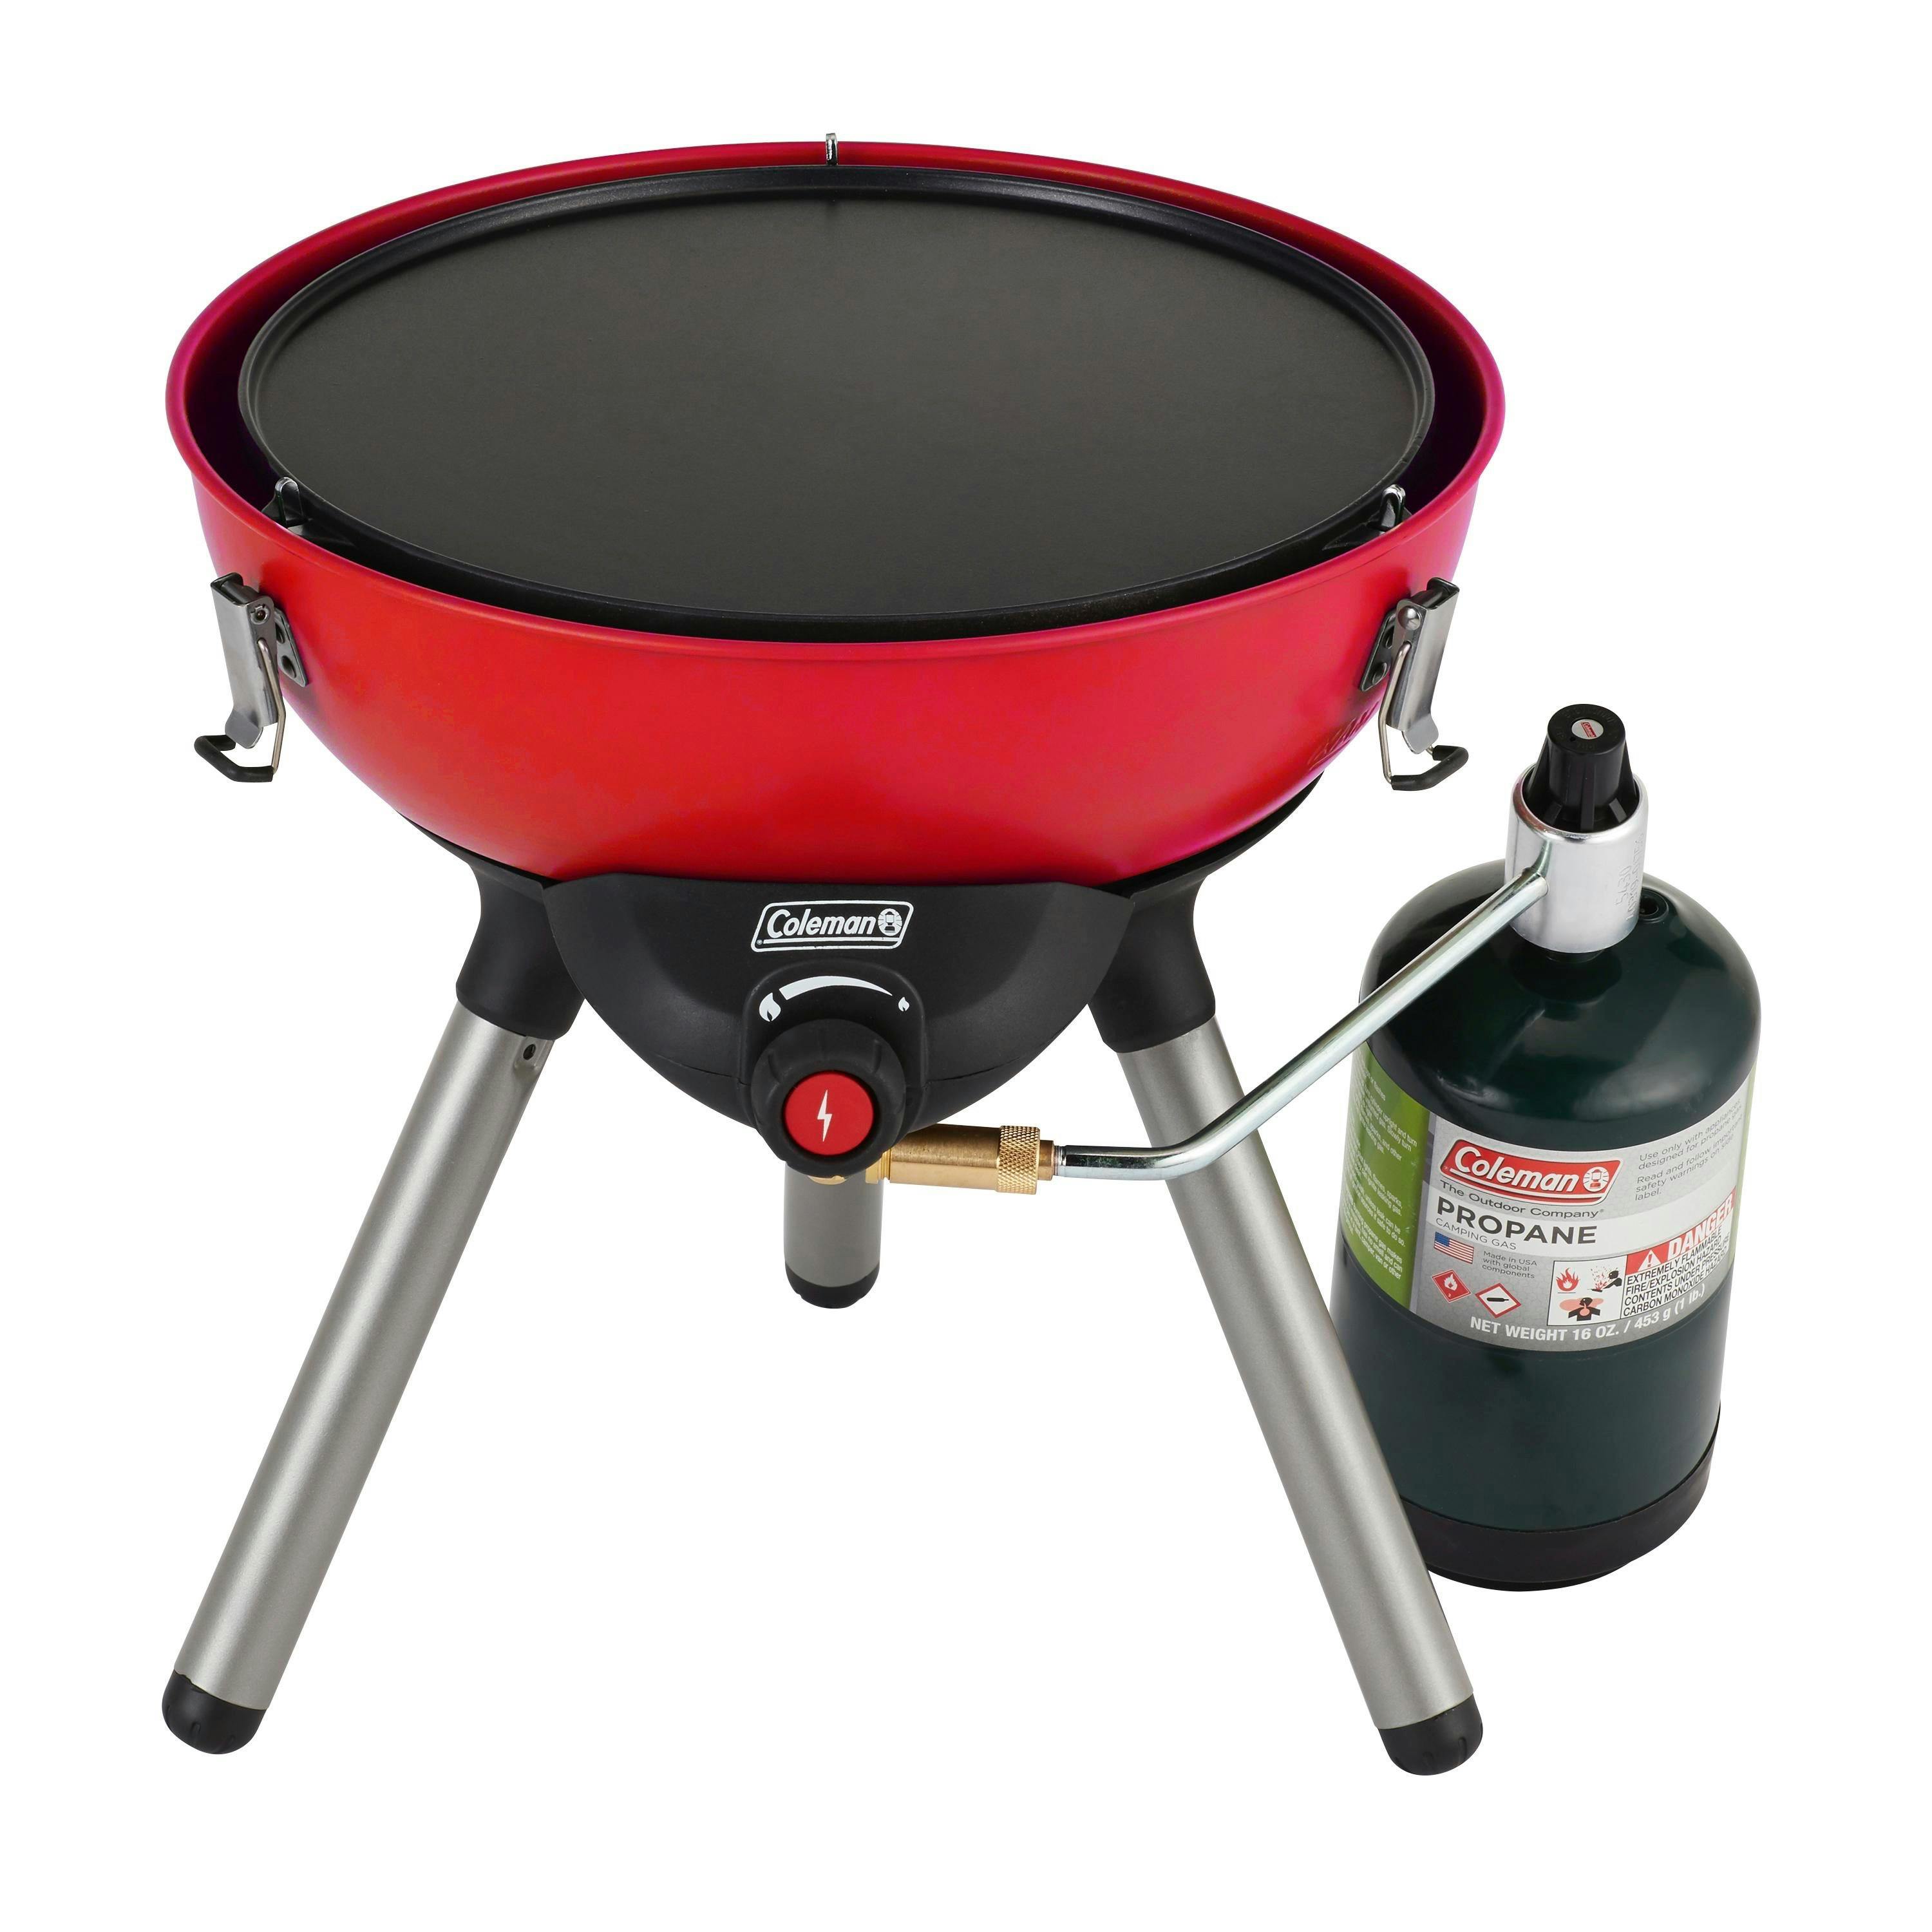 Coleman 4-In-1 Portable Propane Gas Camping Stove